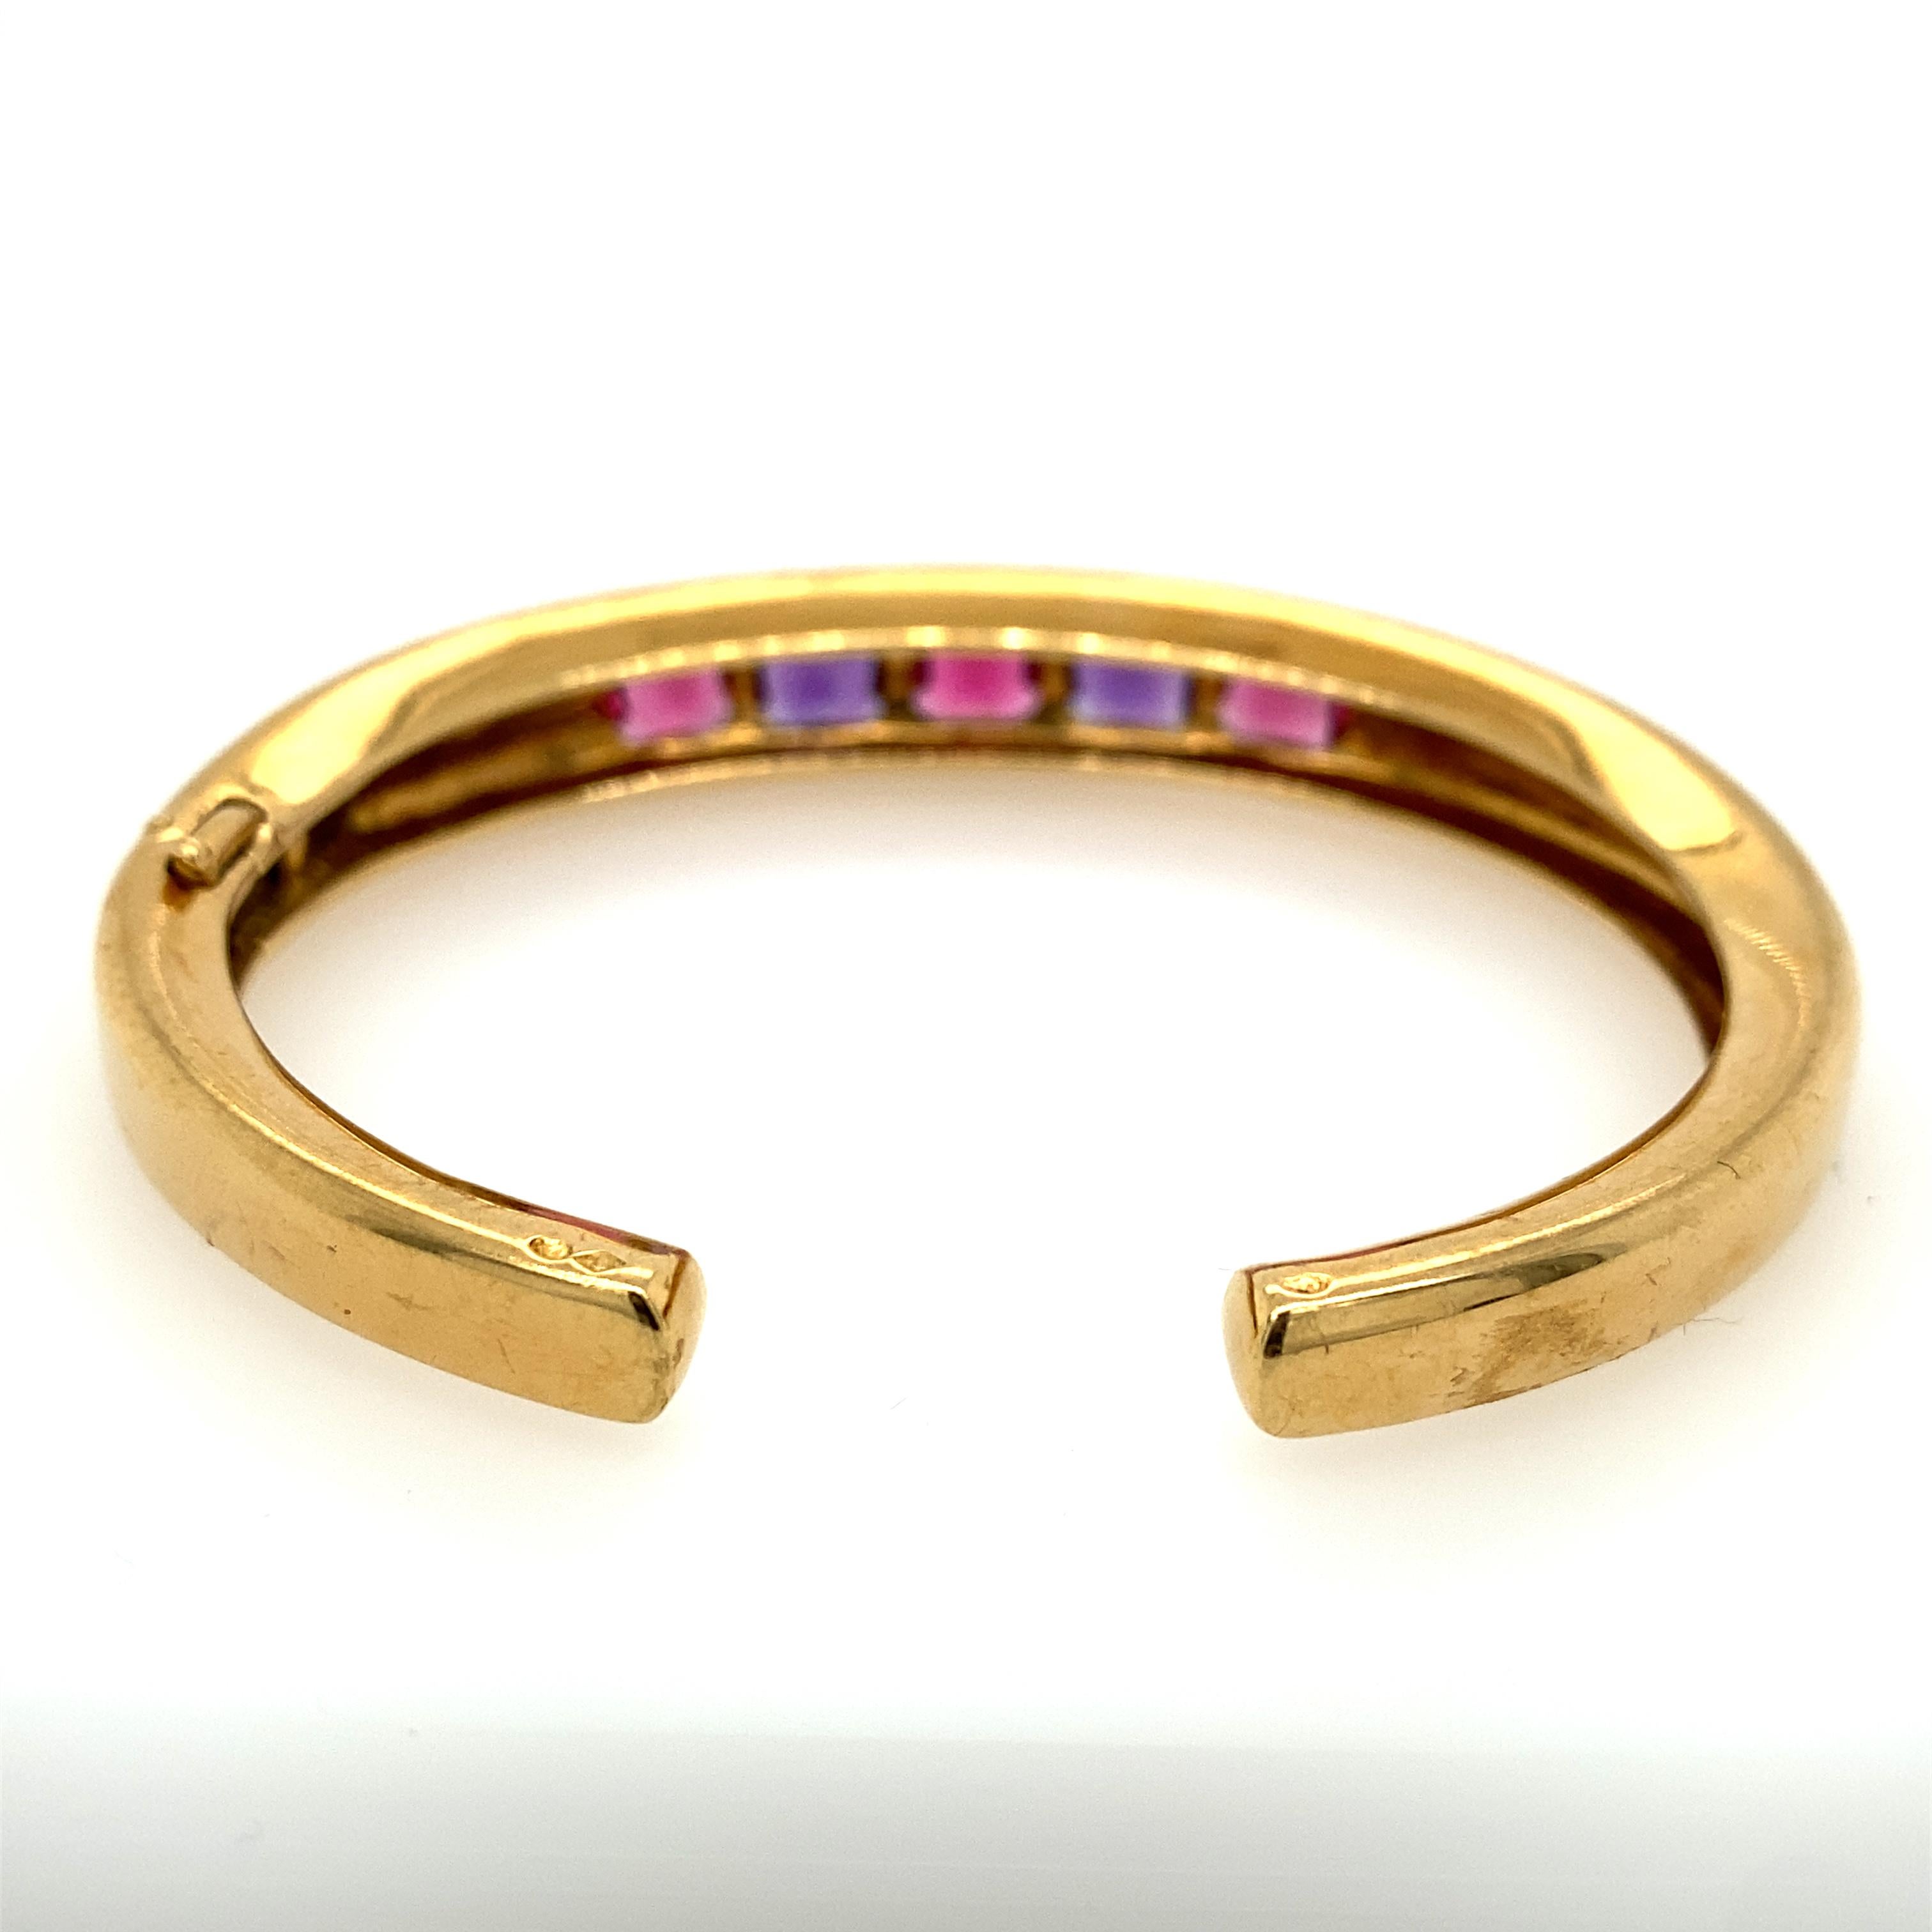 Contemporary Van Cleef & Arpels 18k Yellow Gold Bracelet with Pink Tourmaline and Amethyst